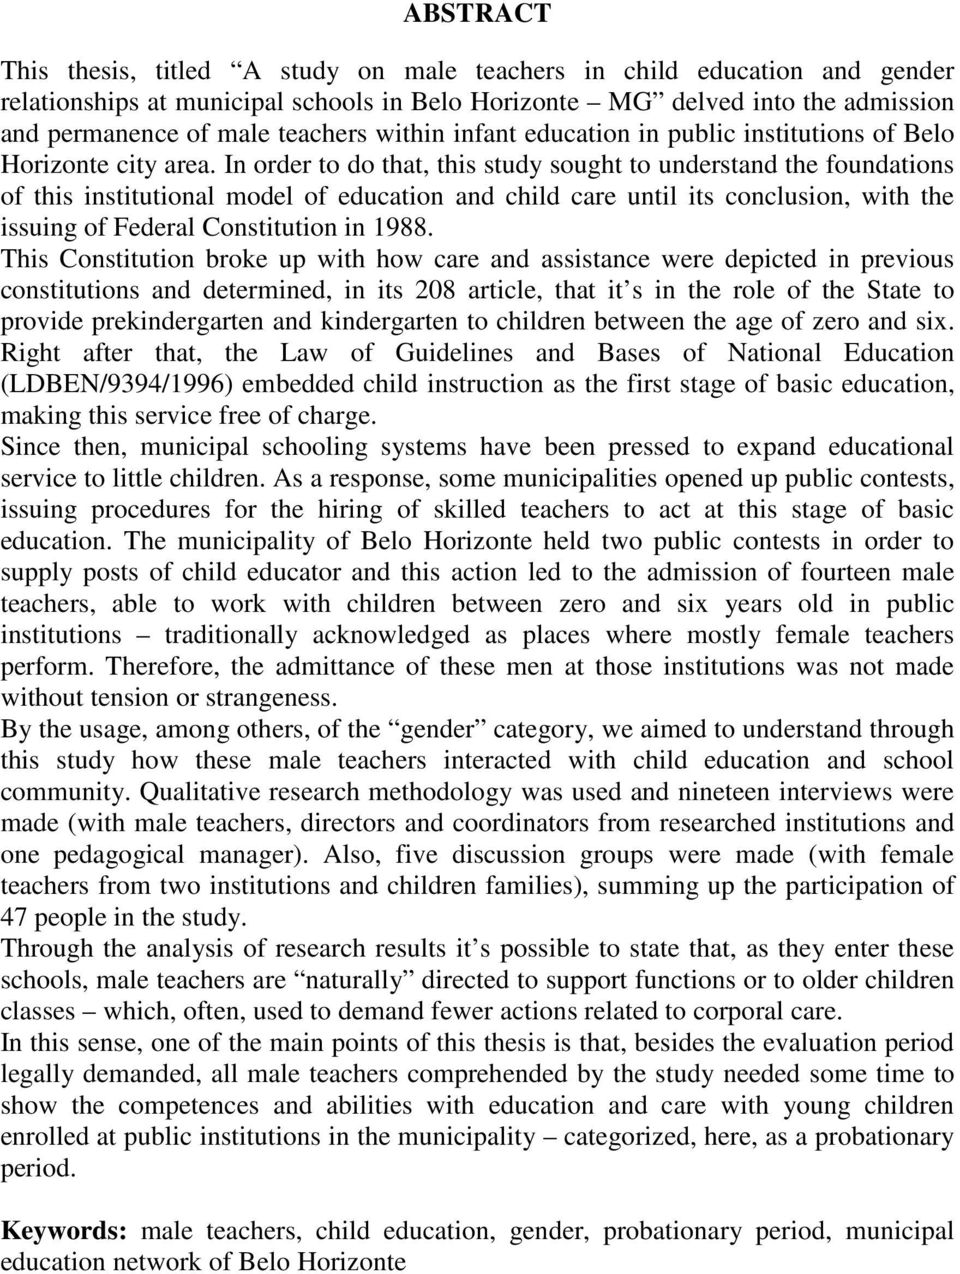 In order to do that, this study sought to understand the foundations of this institutional model of education and child care until its conclusion, with the issuing of Federal Constitution in 1988.